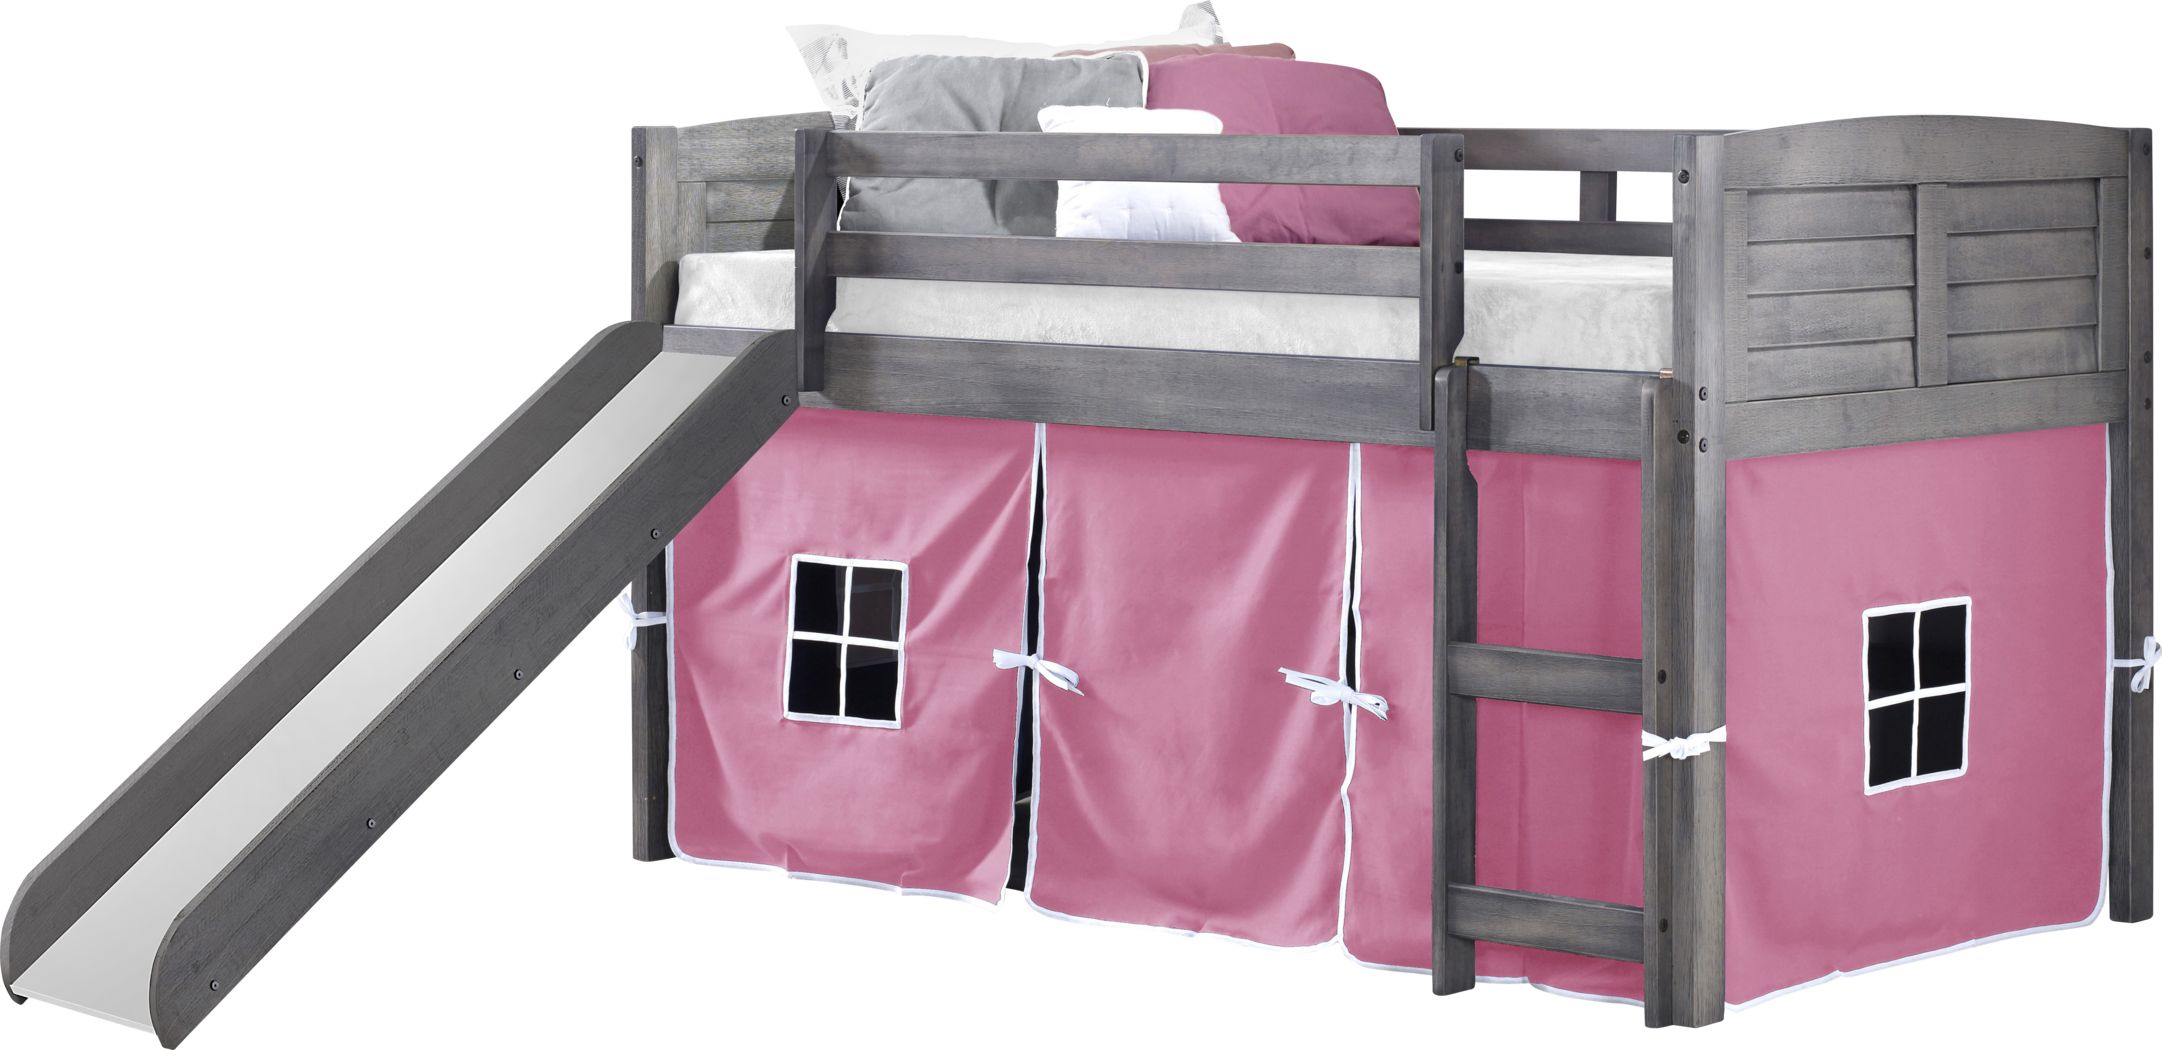 Loft Beds With Slide Underneath, Child Bunk Bed With Slide And Tent